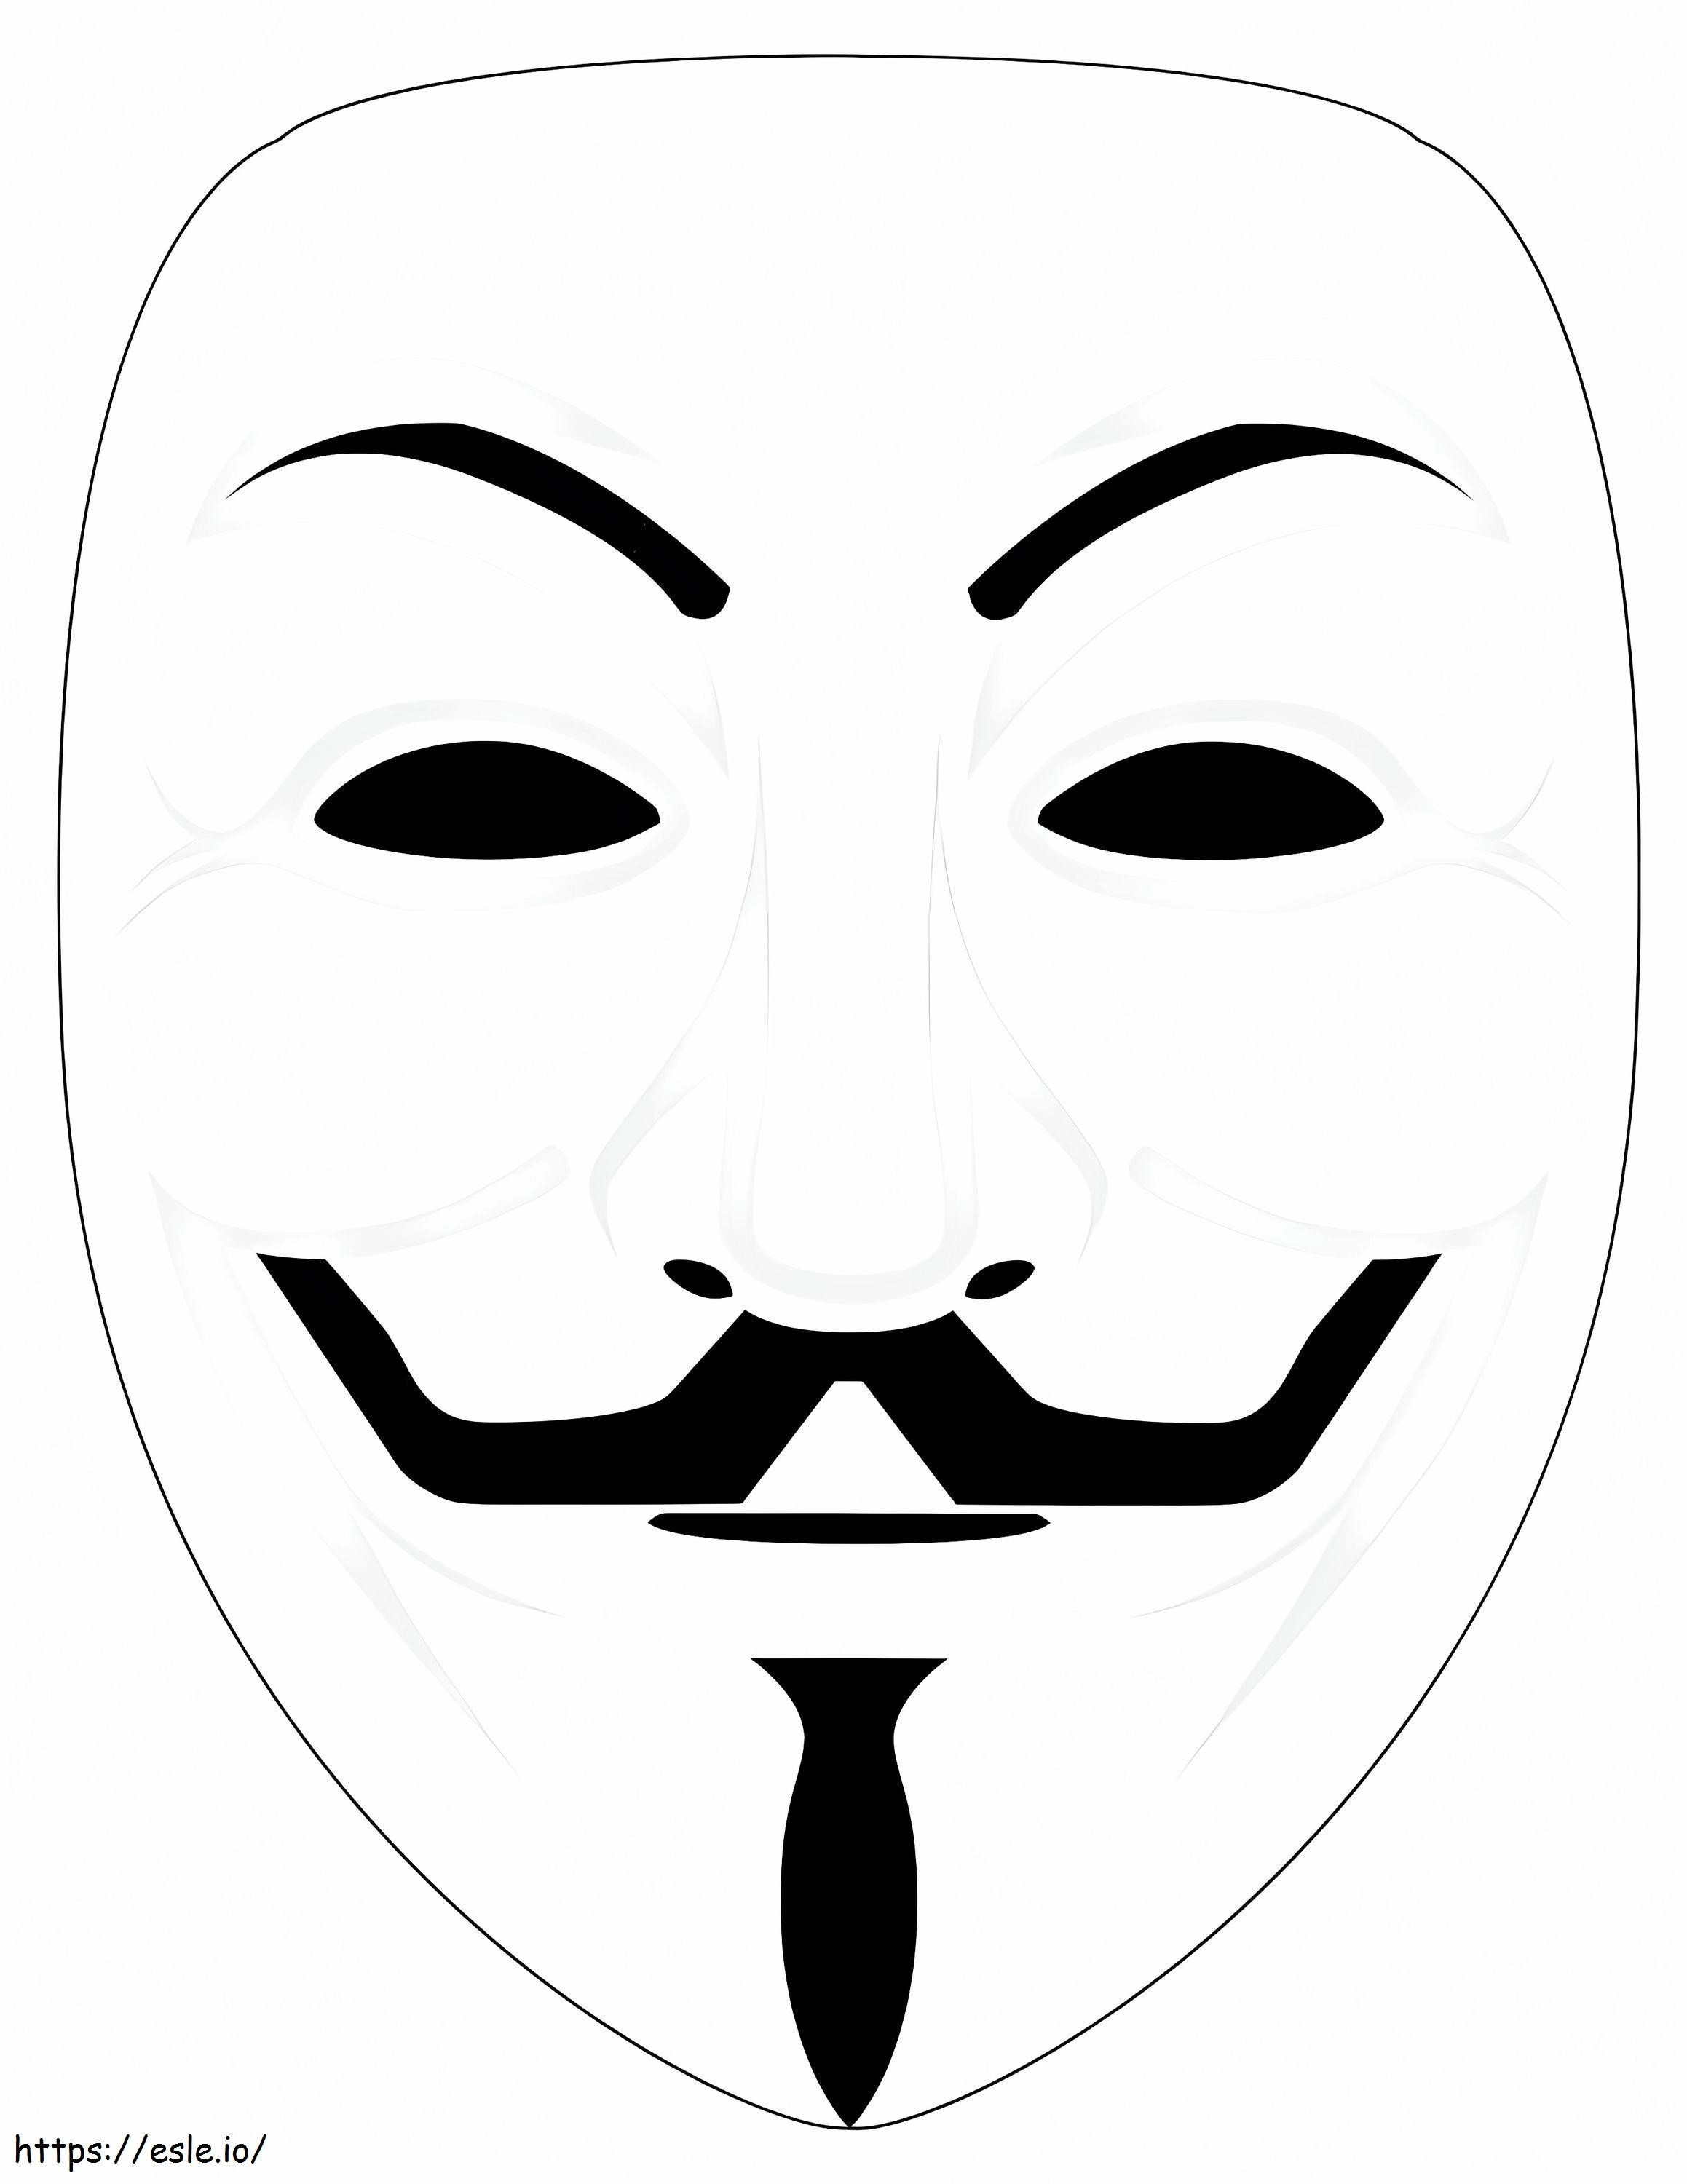 Guy Fawkes Mask coloring page